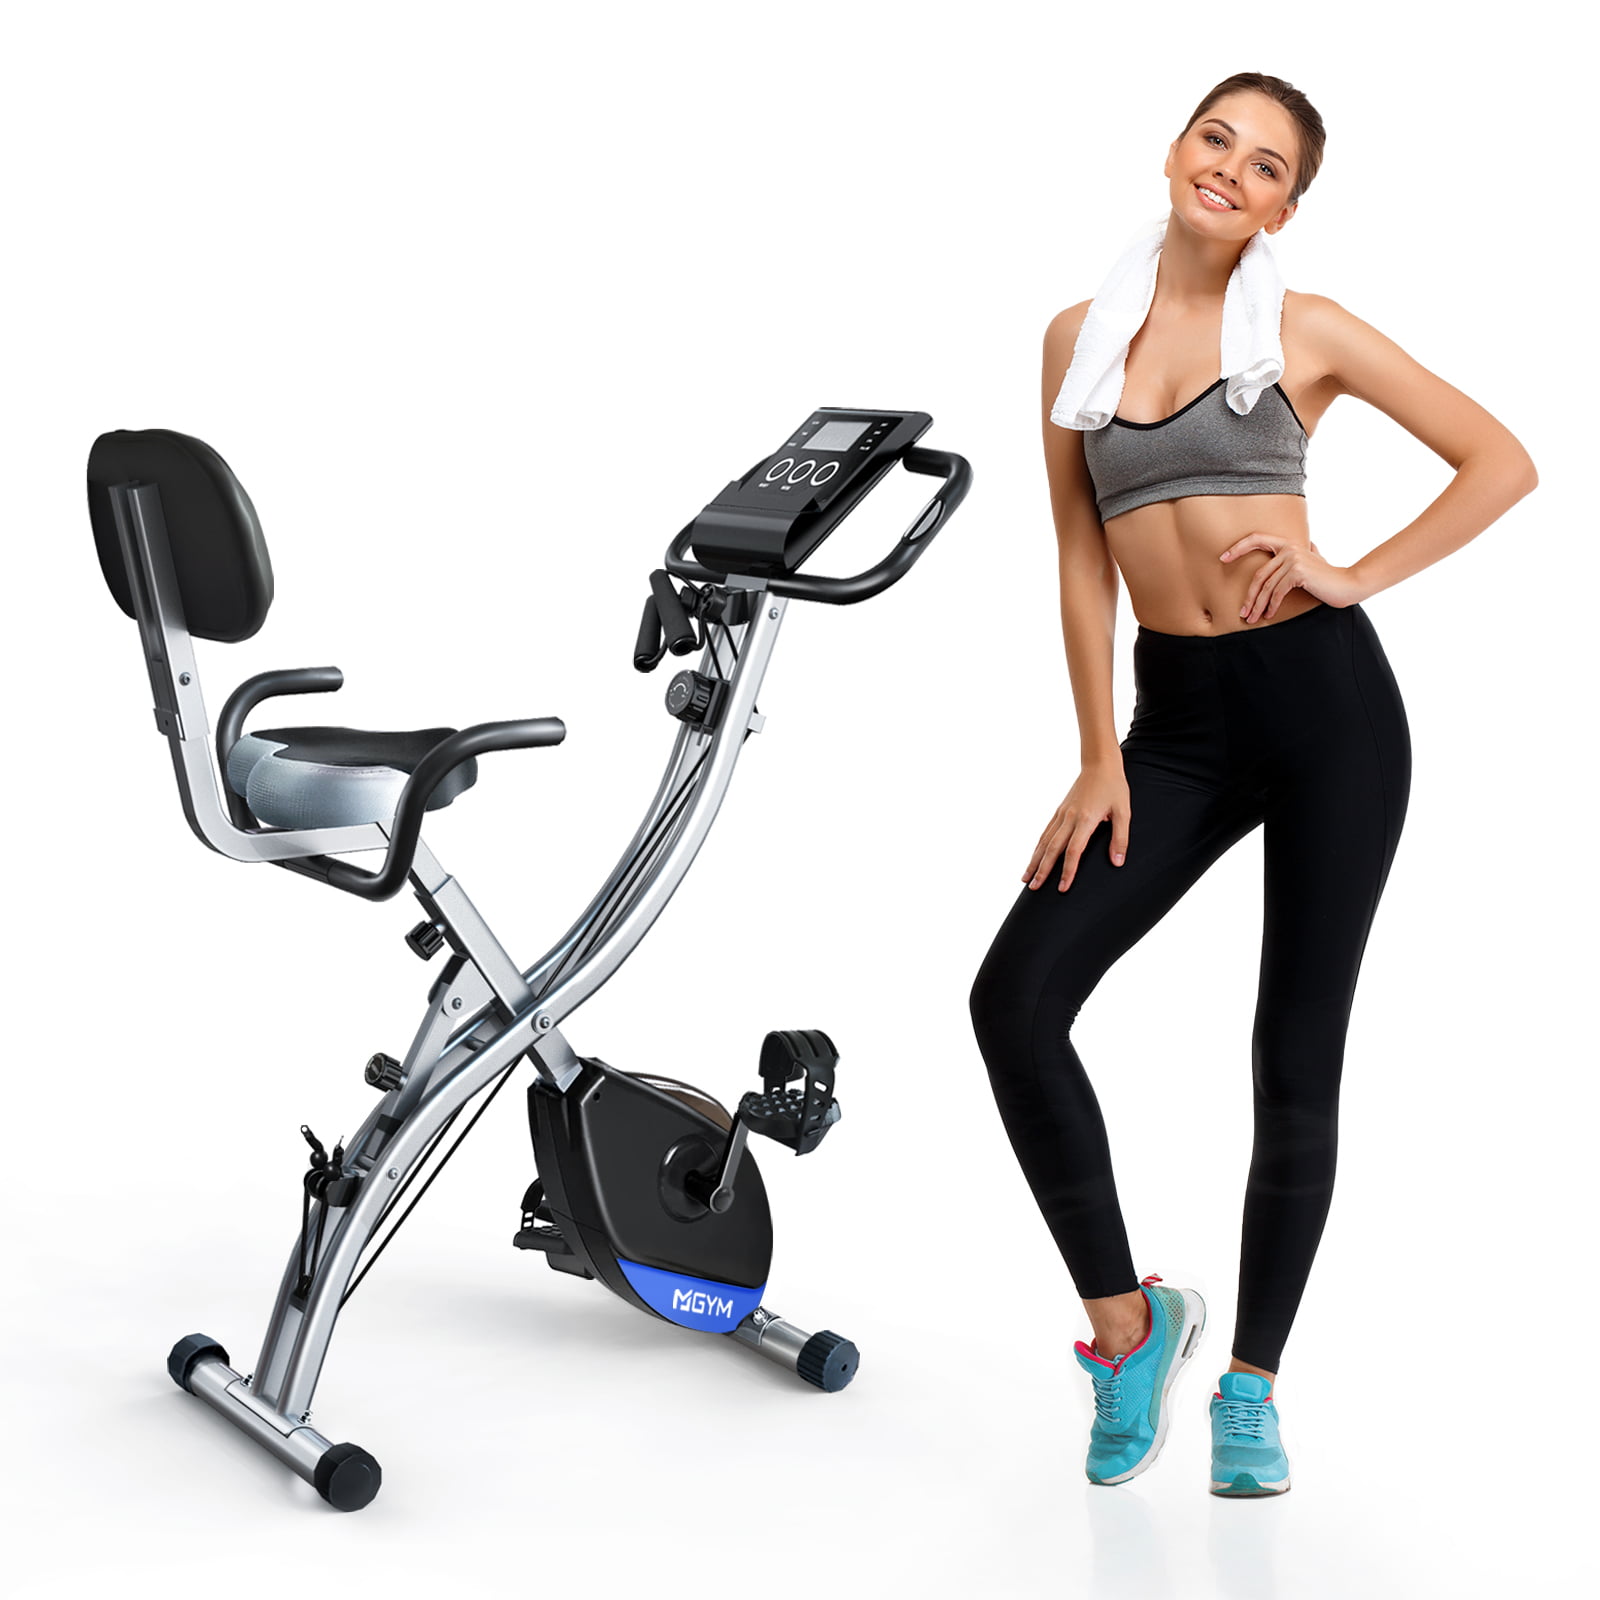 Folding Exercise Cardio Bike PRO Sport Cycling Home Fitness Machine Gym Workout 